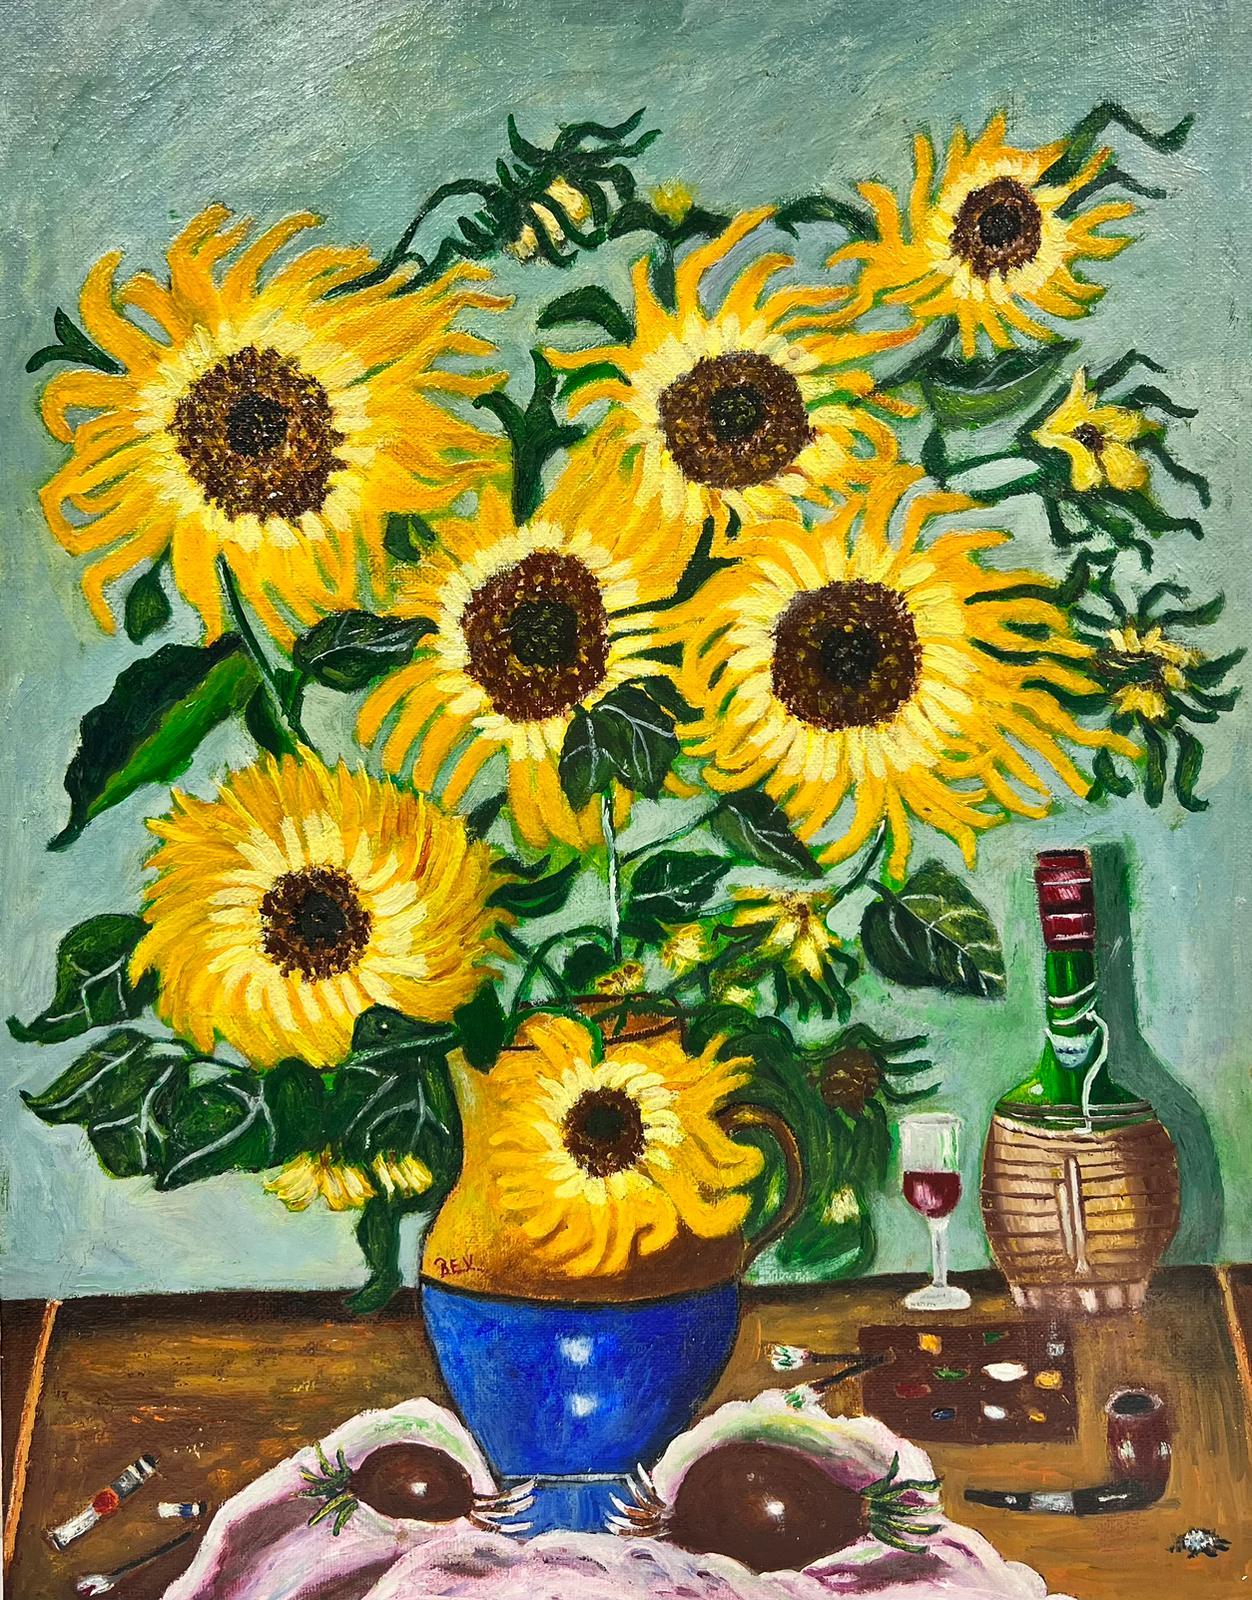 Contemporary British Acrylic Painting Sunflowers in Vase